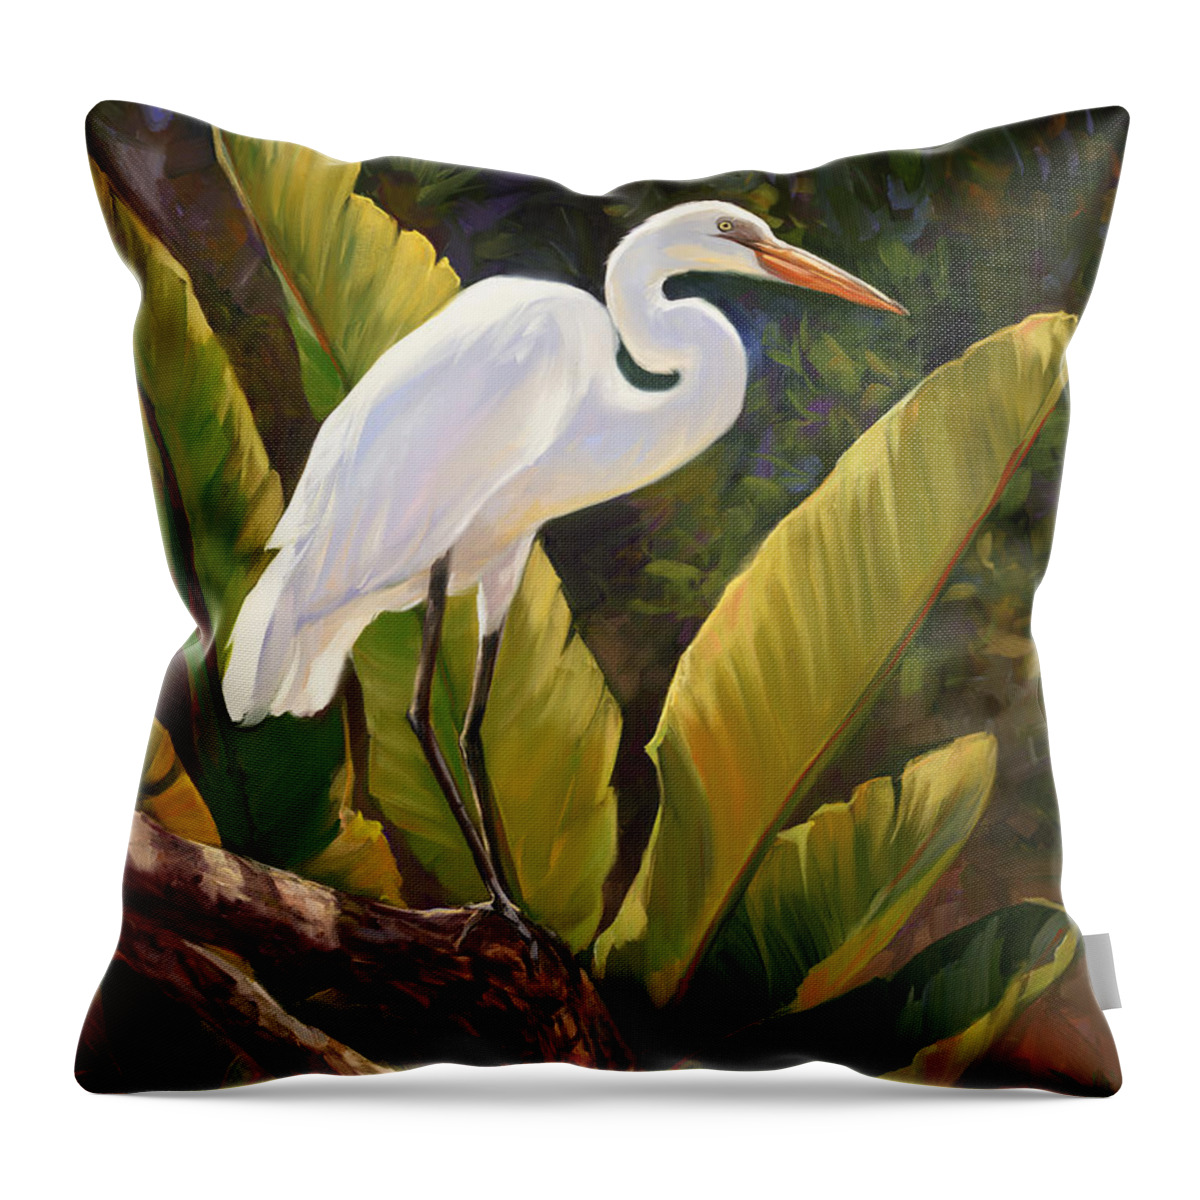 Heron Throw Pillow featuring the painting Tropical Heron by Laurie Snow Hein